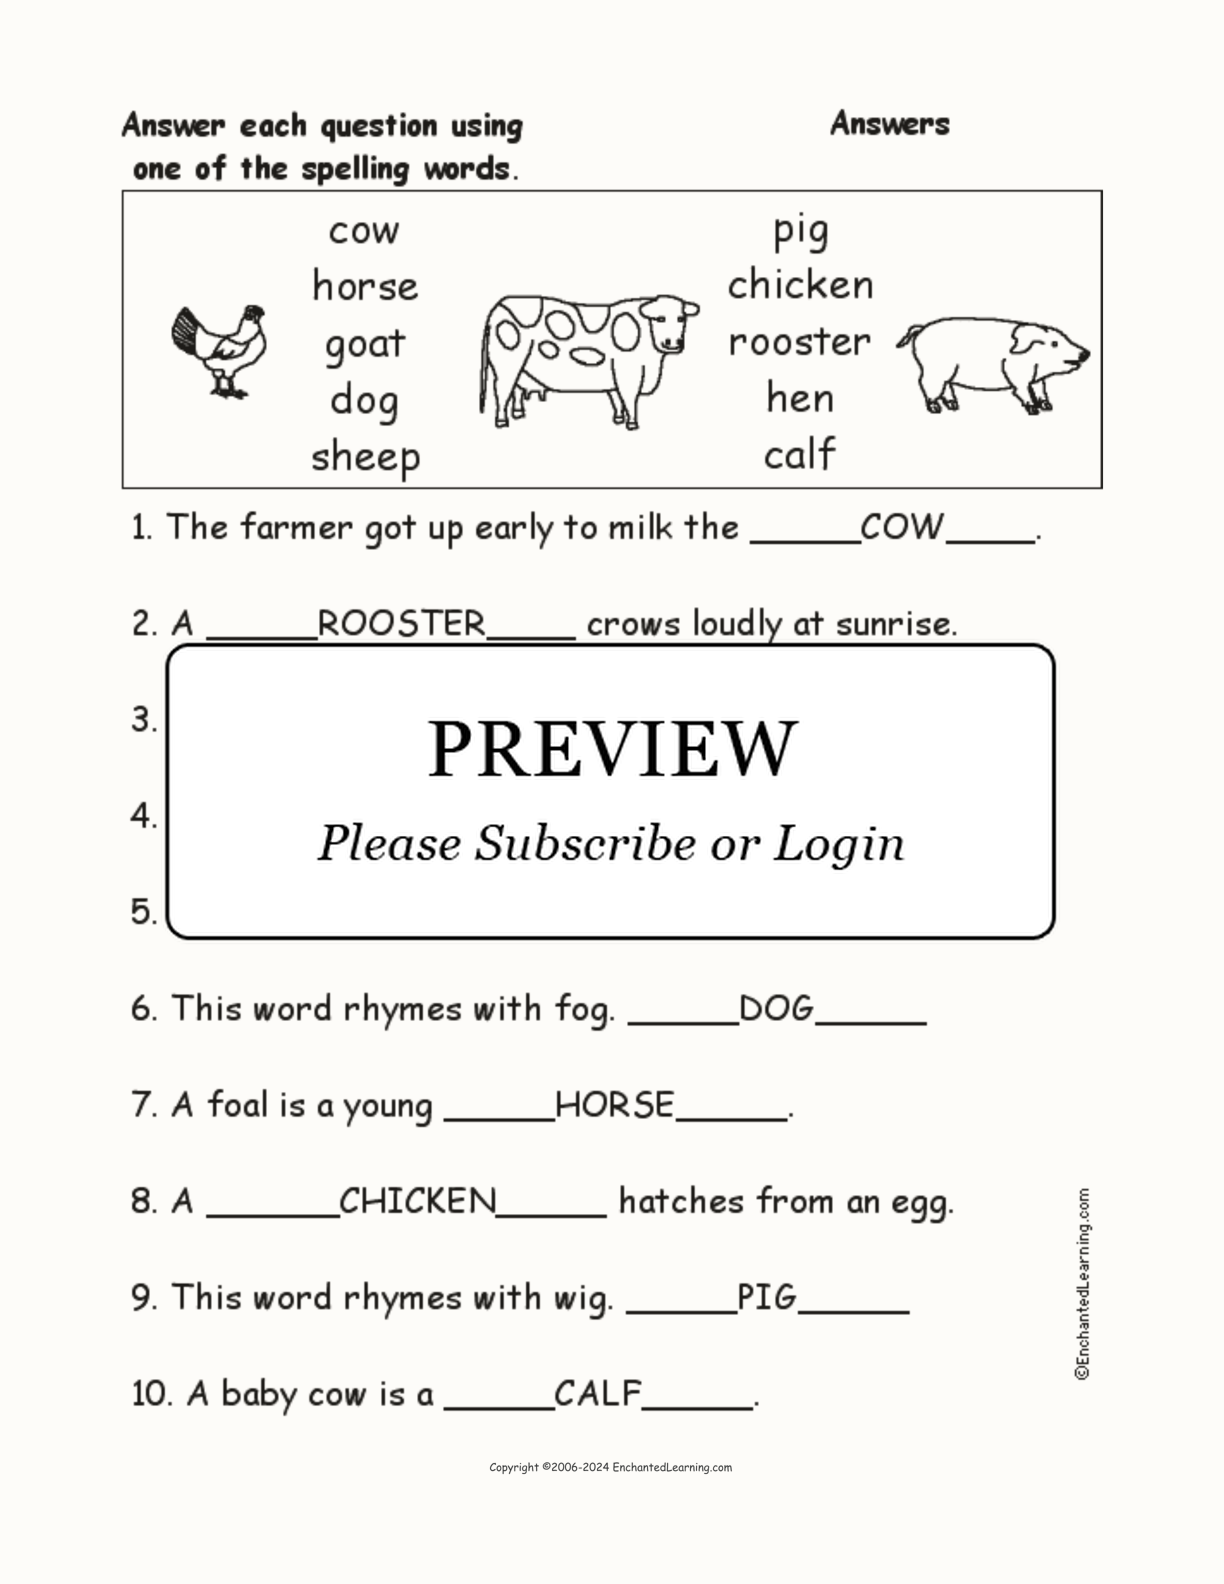 Farm Animals: Spelling Word Questions interactive worksheet page 2